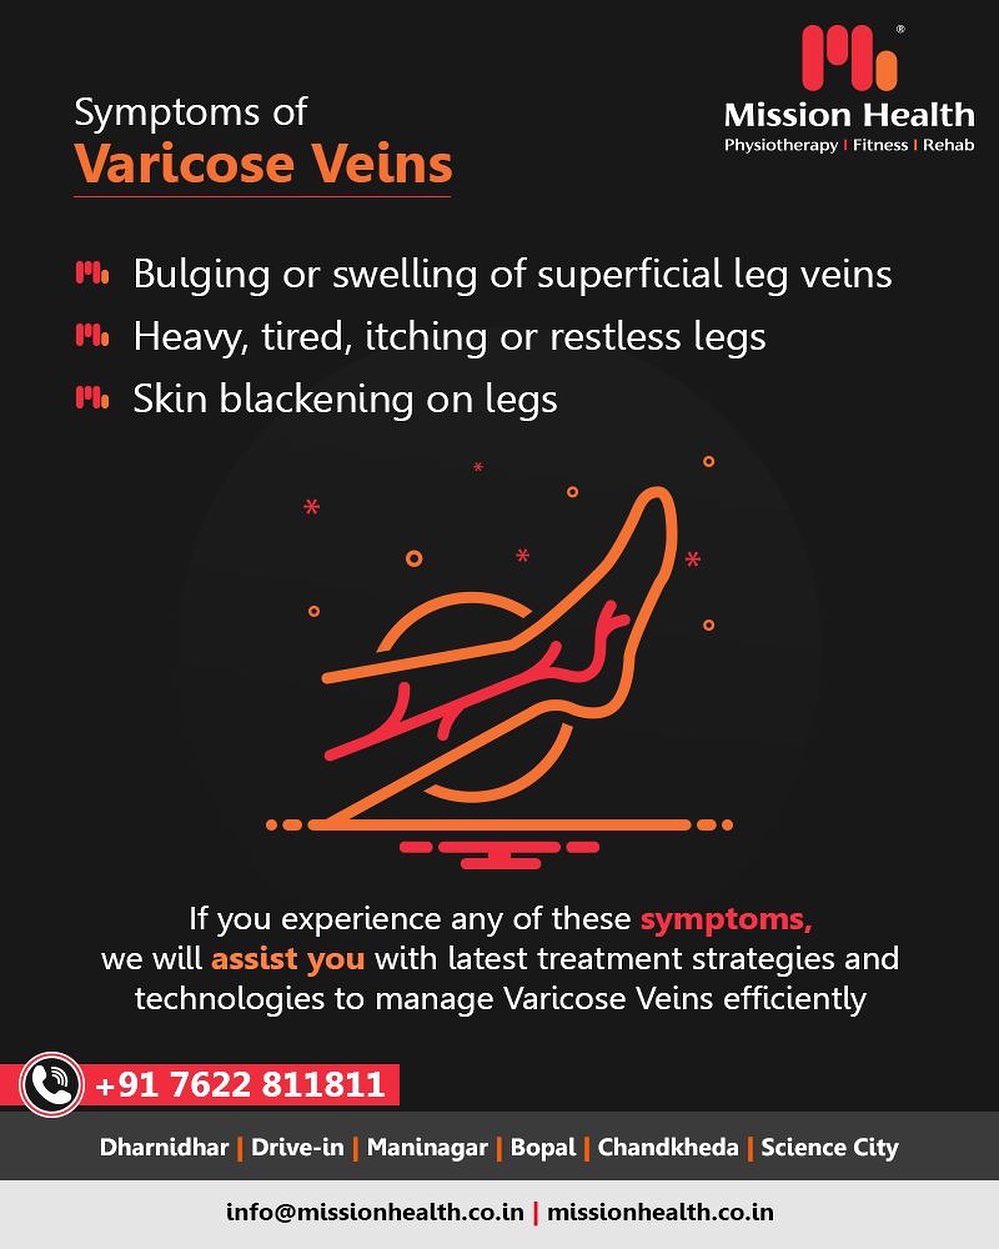 Don’t live with the pain of #VaricoseVeins! 
#Fitness #MissionHealth #MissionHealthIndia #AbilityClinic #MovementIsLife